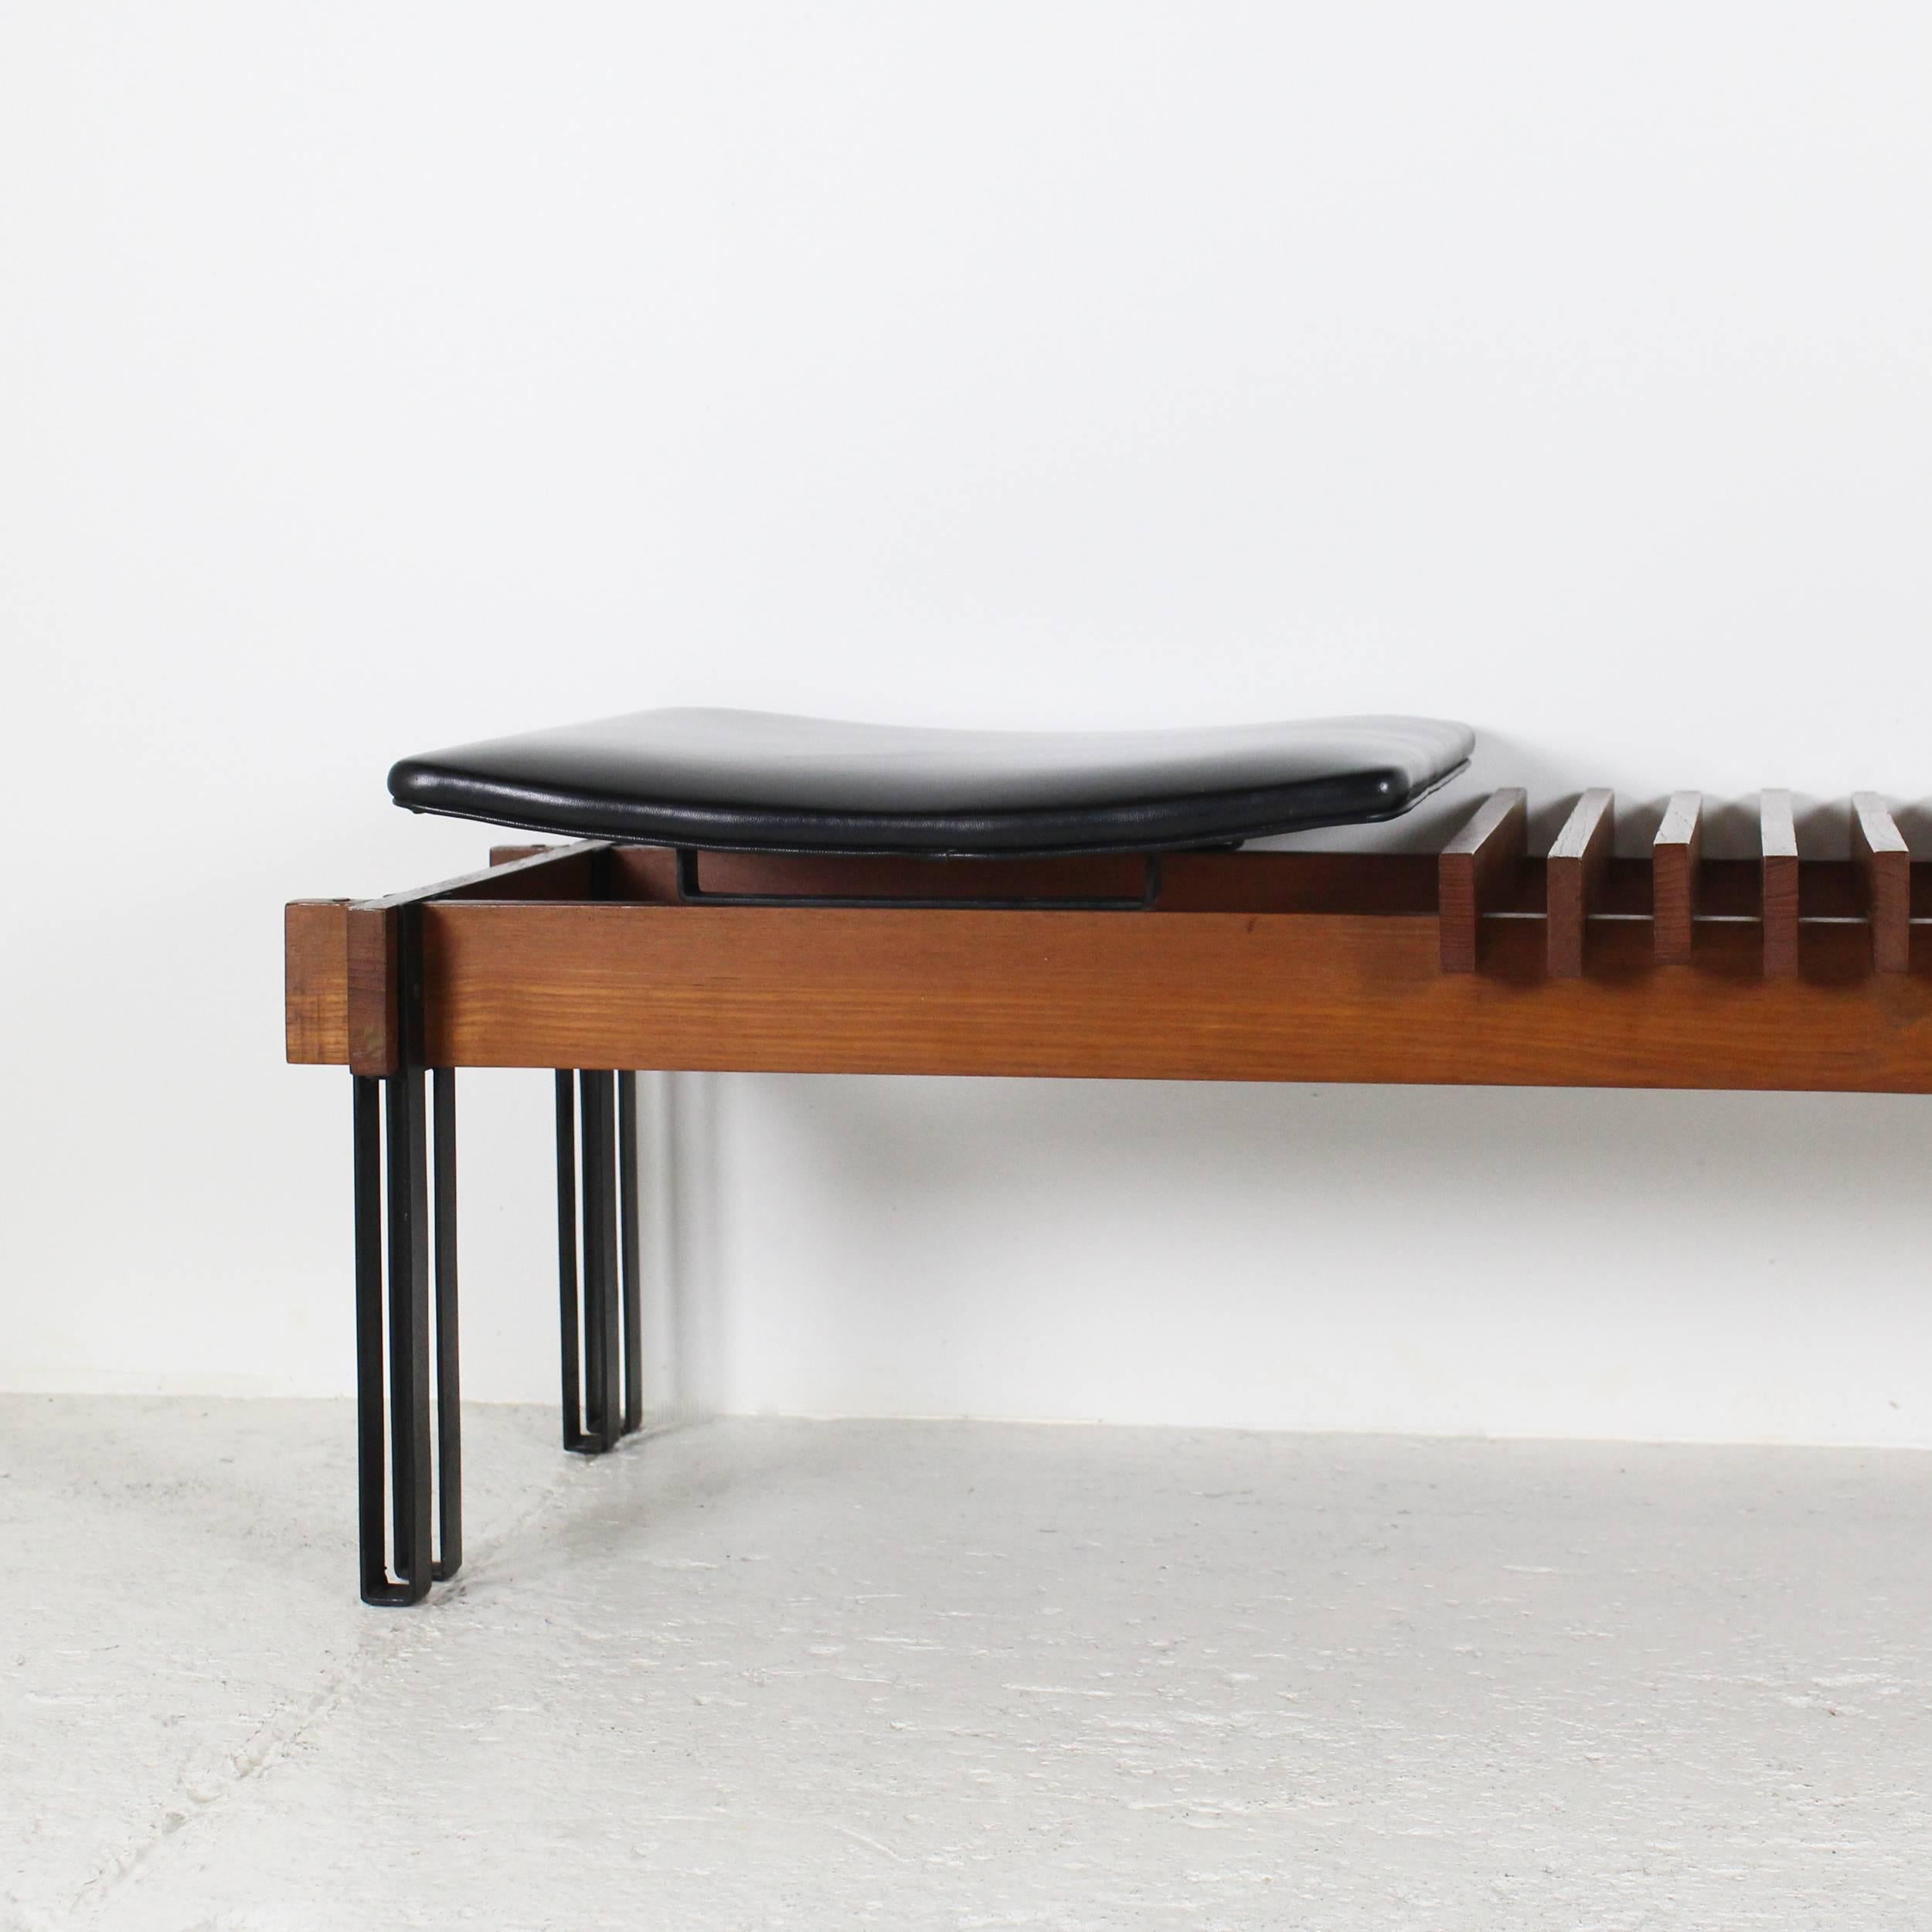 Mid-Century bench in teak on black metal legs with black leatherette seat, designed by Inge and Luciano Rubino, published on 1964 (R. ALOI, L'Arredamento Moderno). 
Measures:
Depth: 40 cm / 15.74 inches.
Seat height: 36 cm / 14.17 inches.
Width: